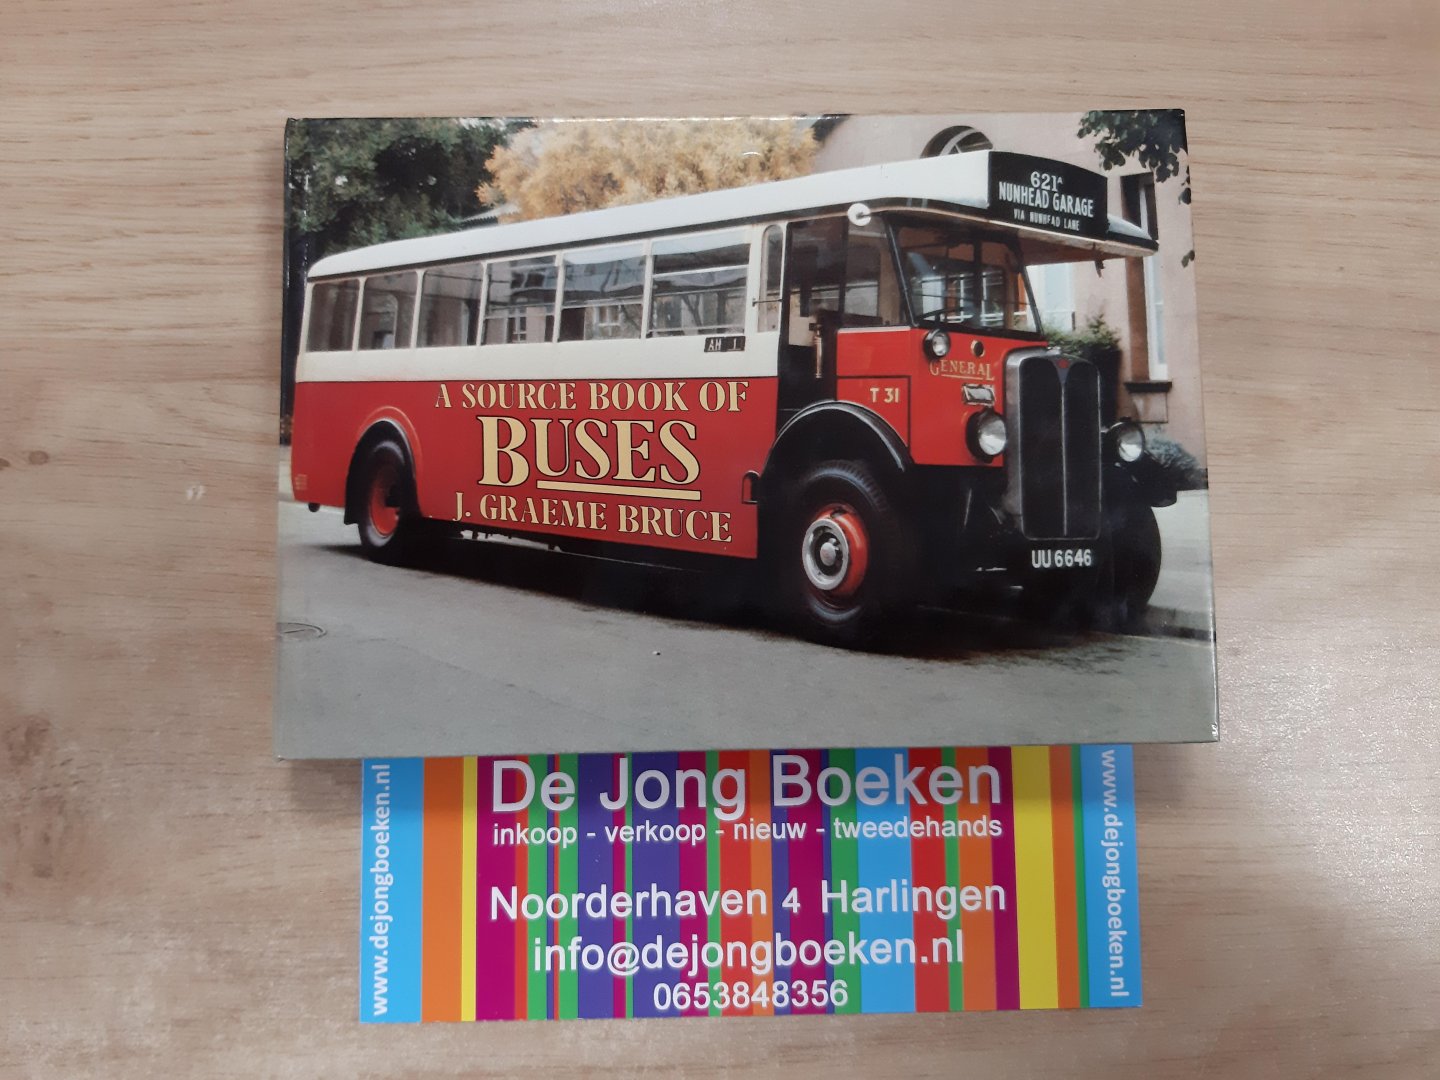 J Graeme Bruce - A Source Book of Buses